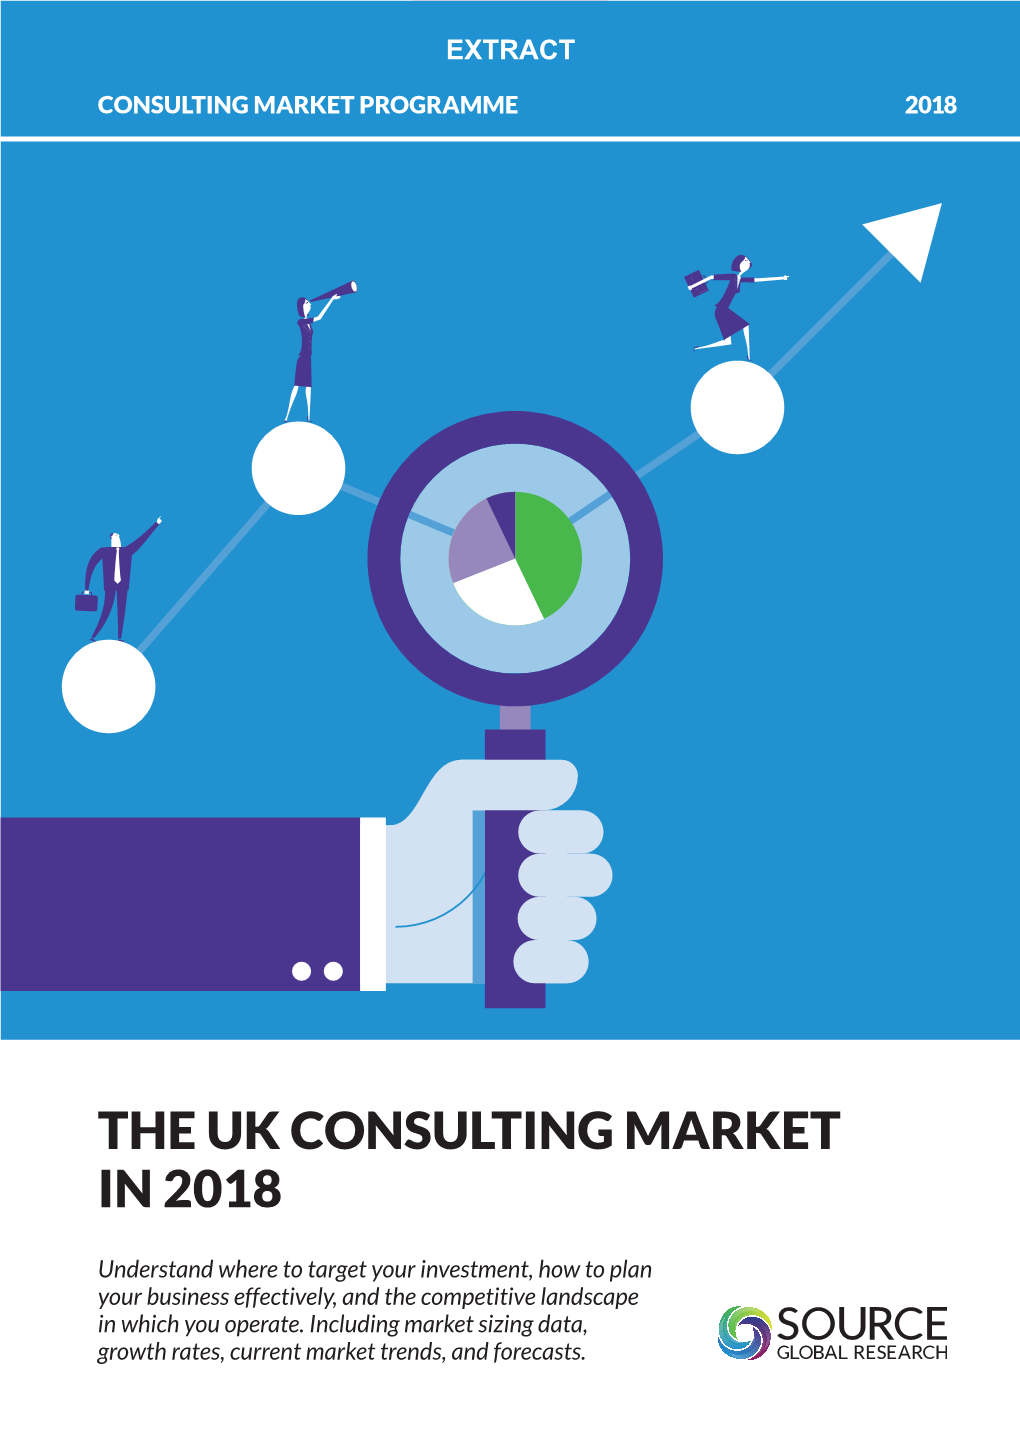 The Uk Consulting Market in 2018